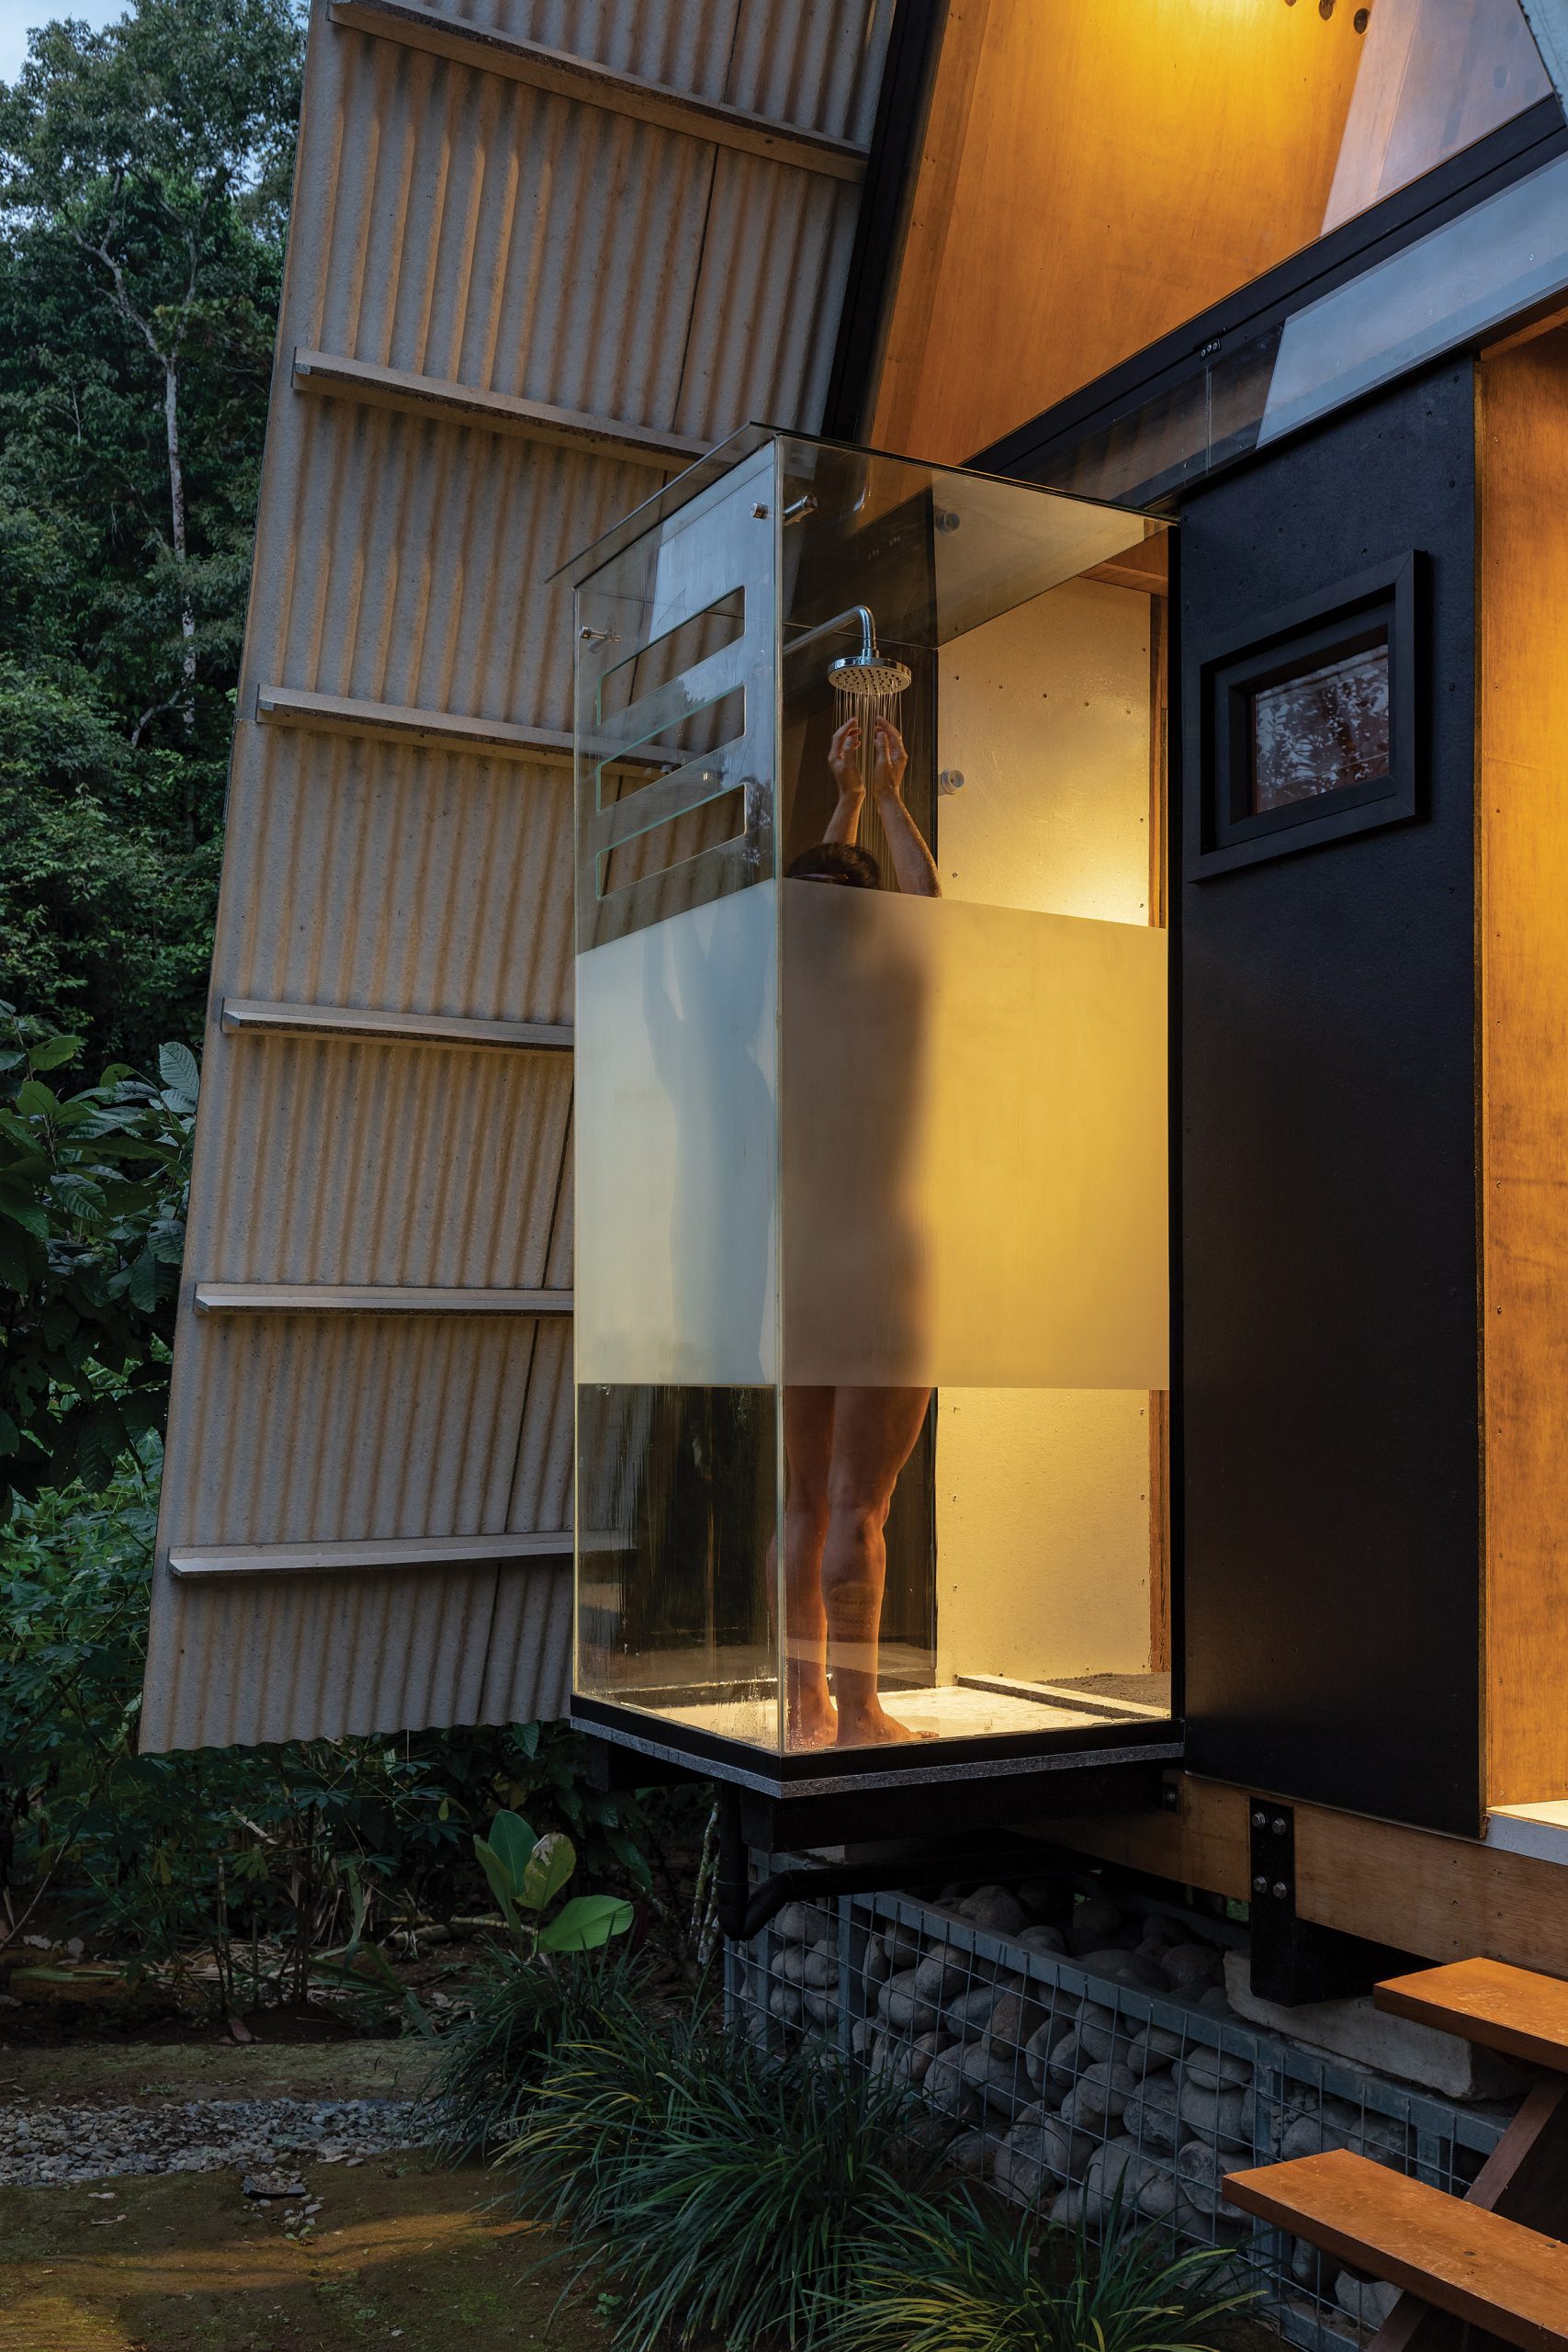 The shower of the Huaira cabin by Diana Salvador and Javier Mera in Ecuador